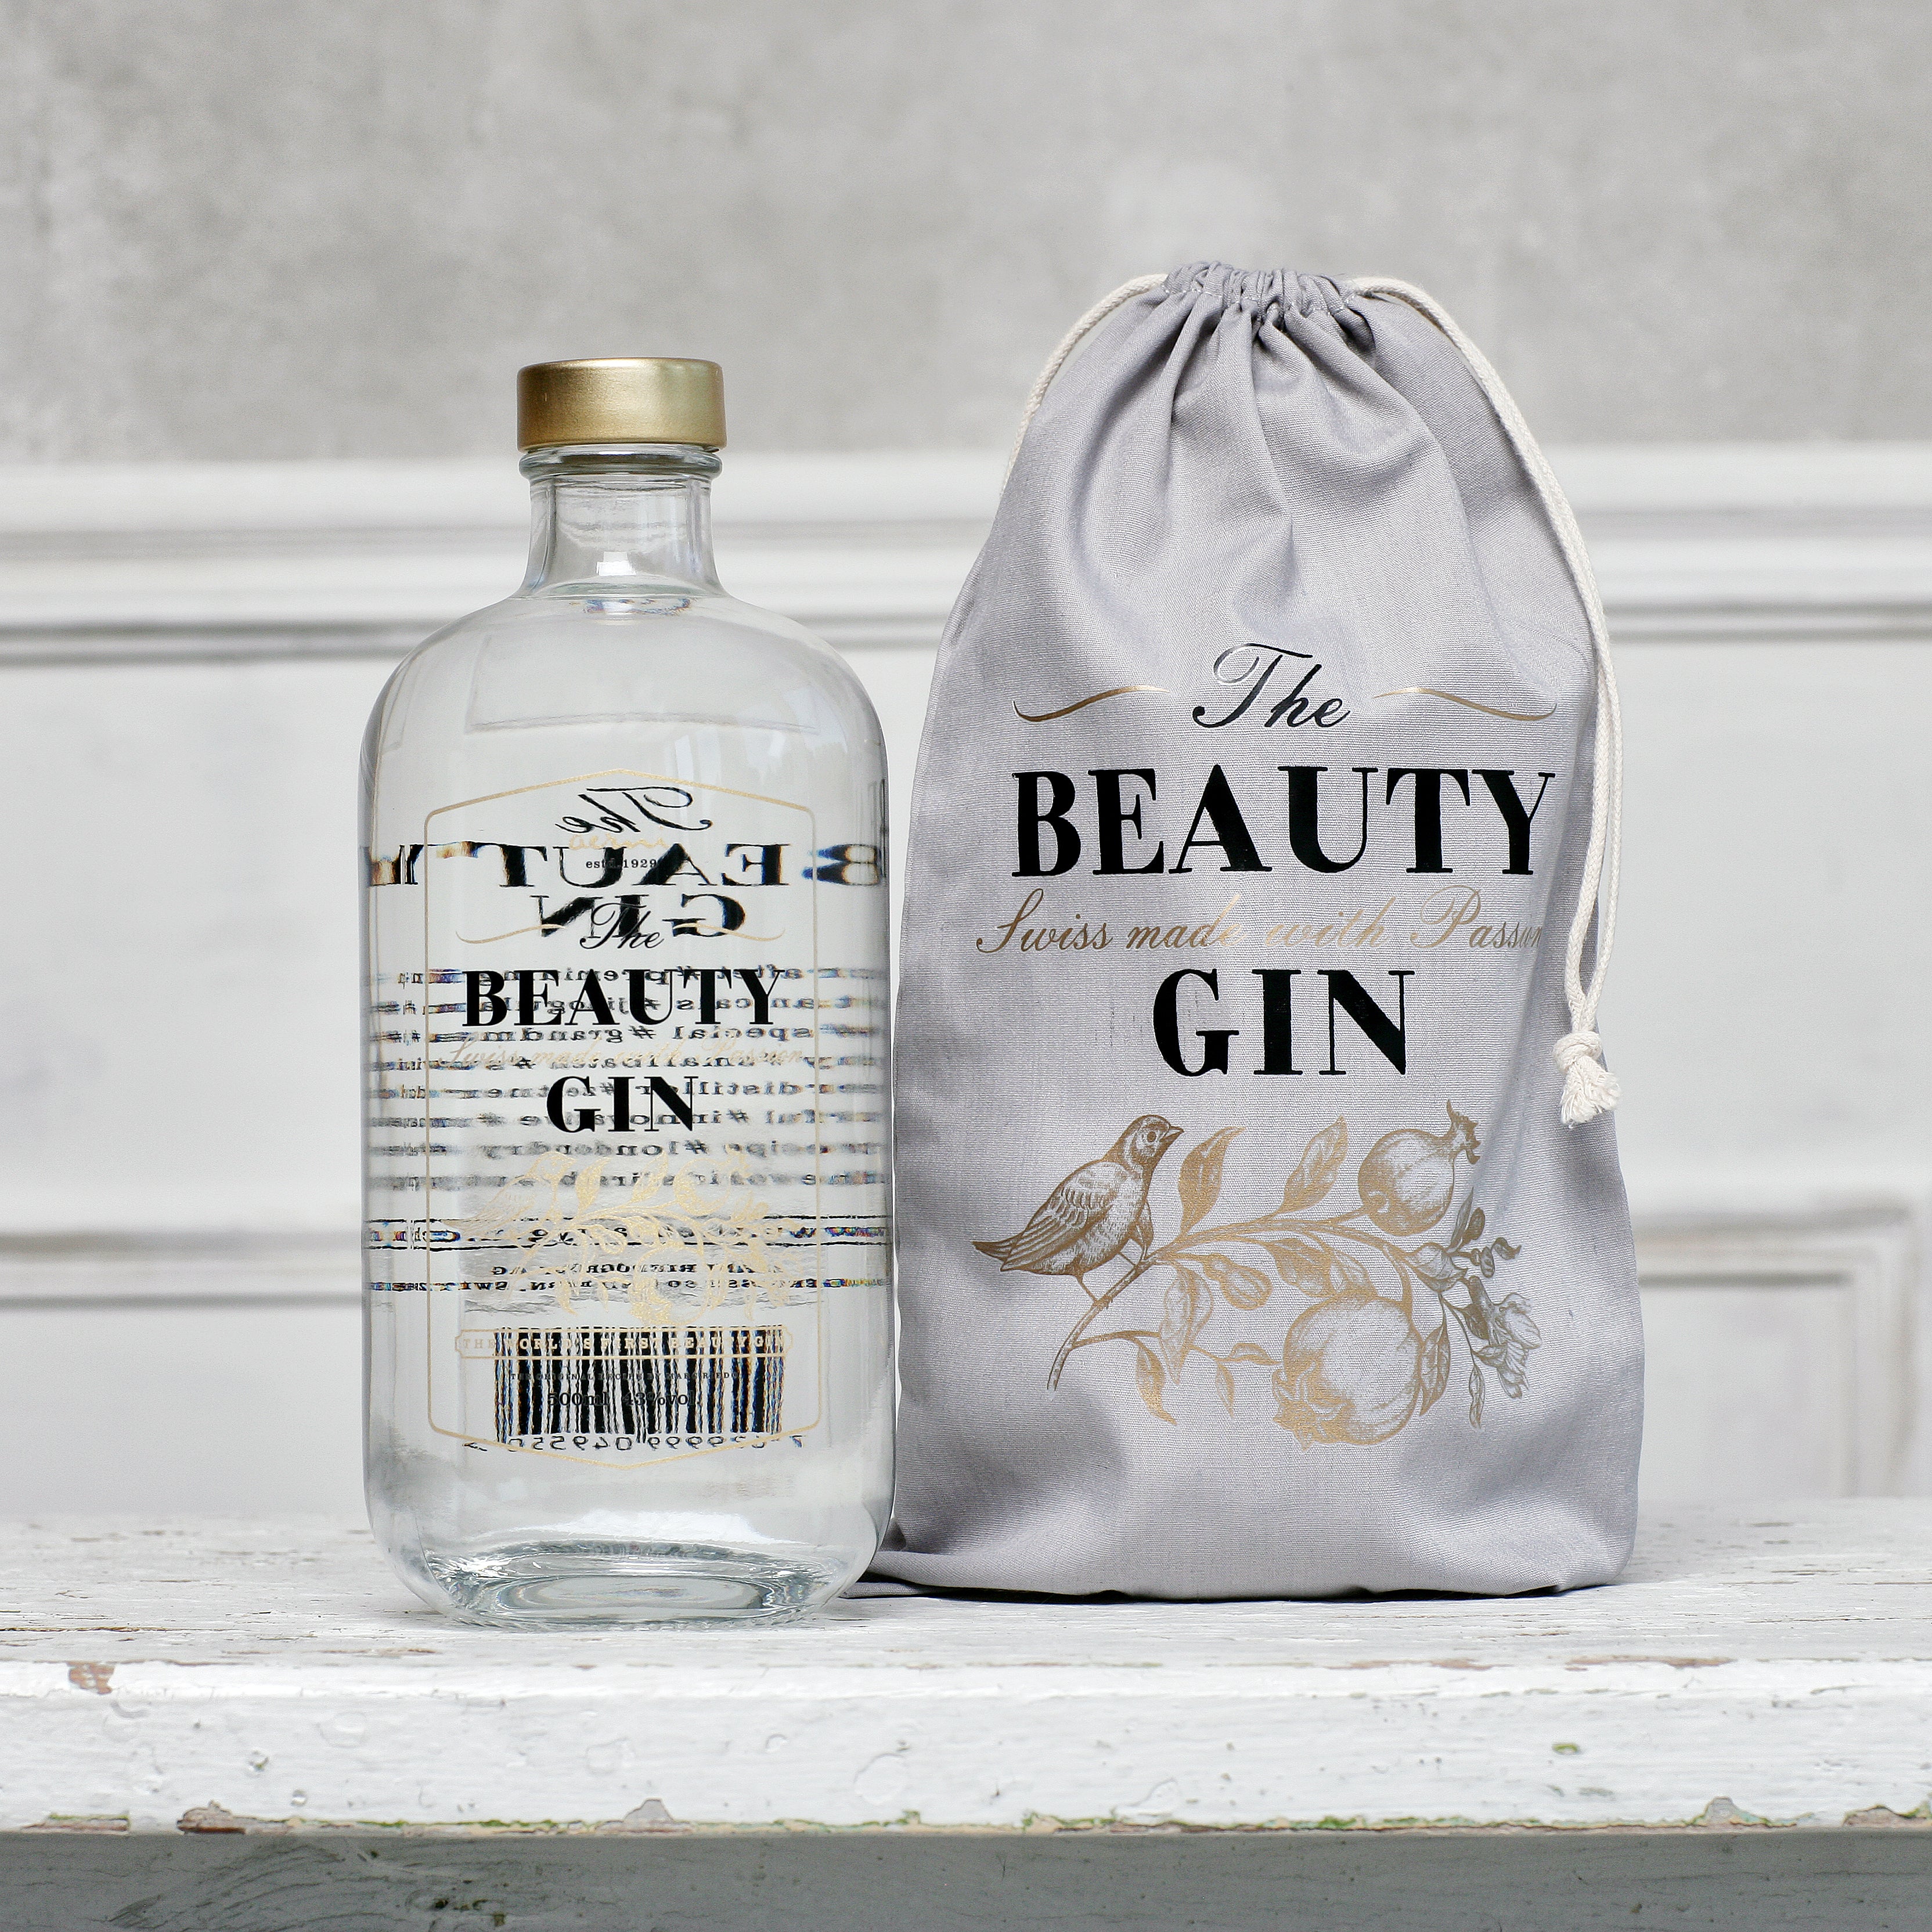 THE BEAUTY GIN & THE SHAVE GIN